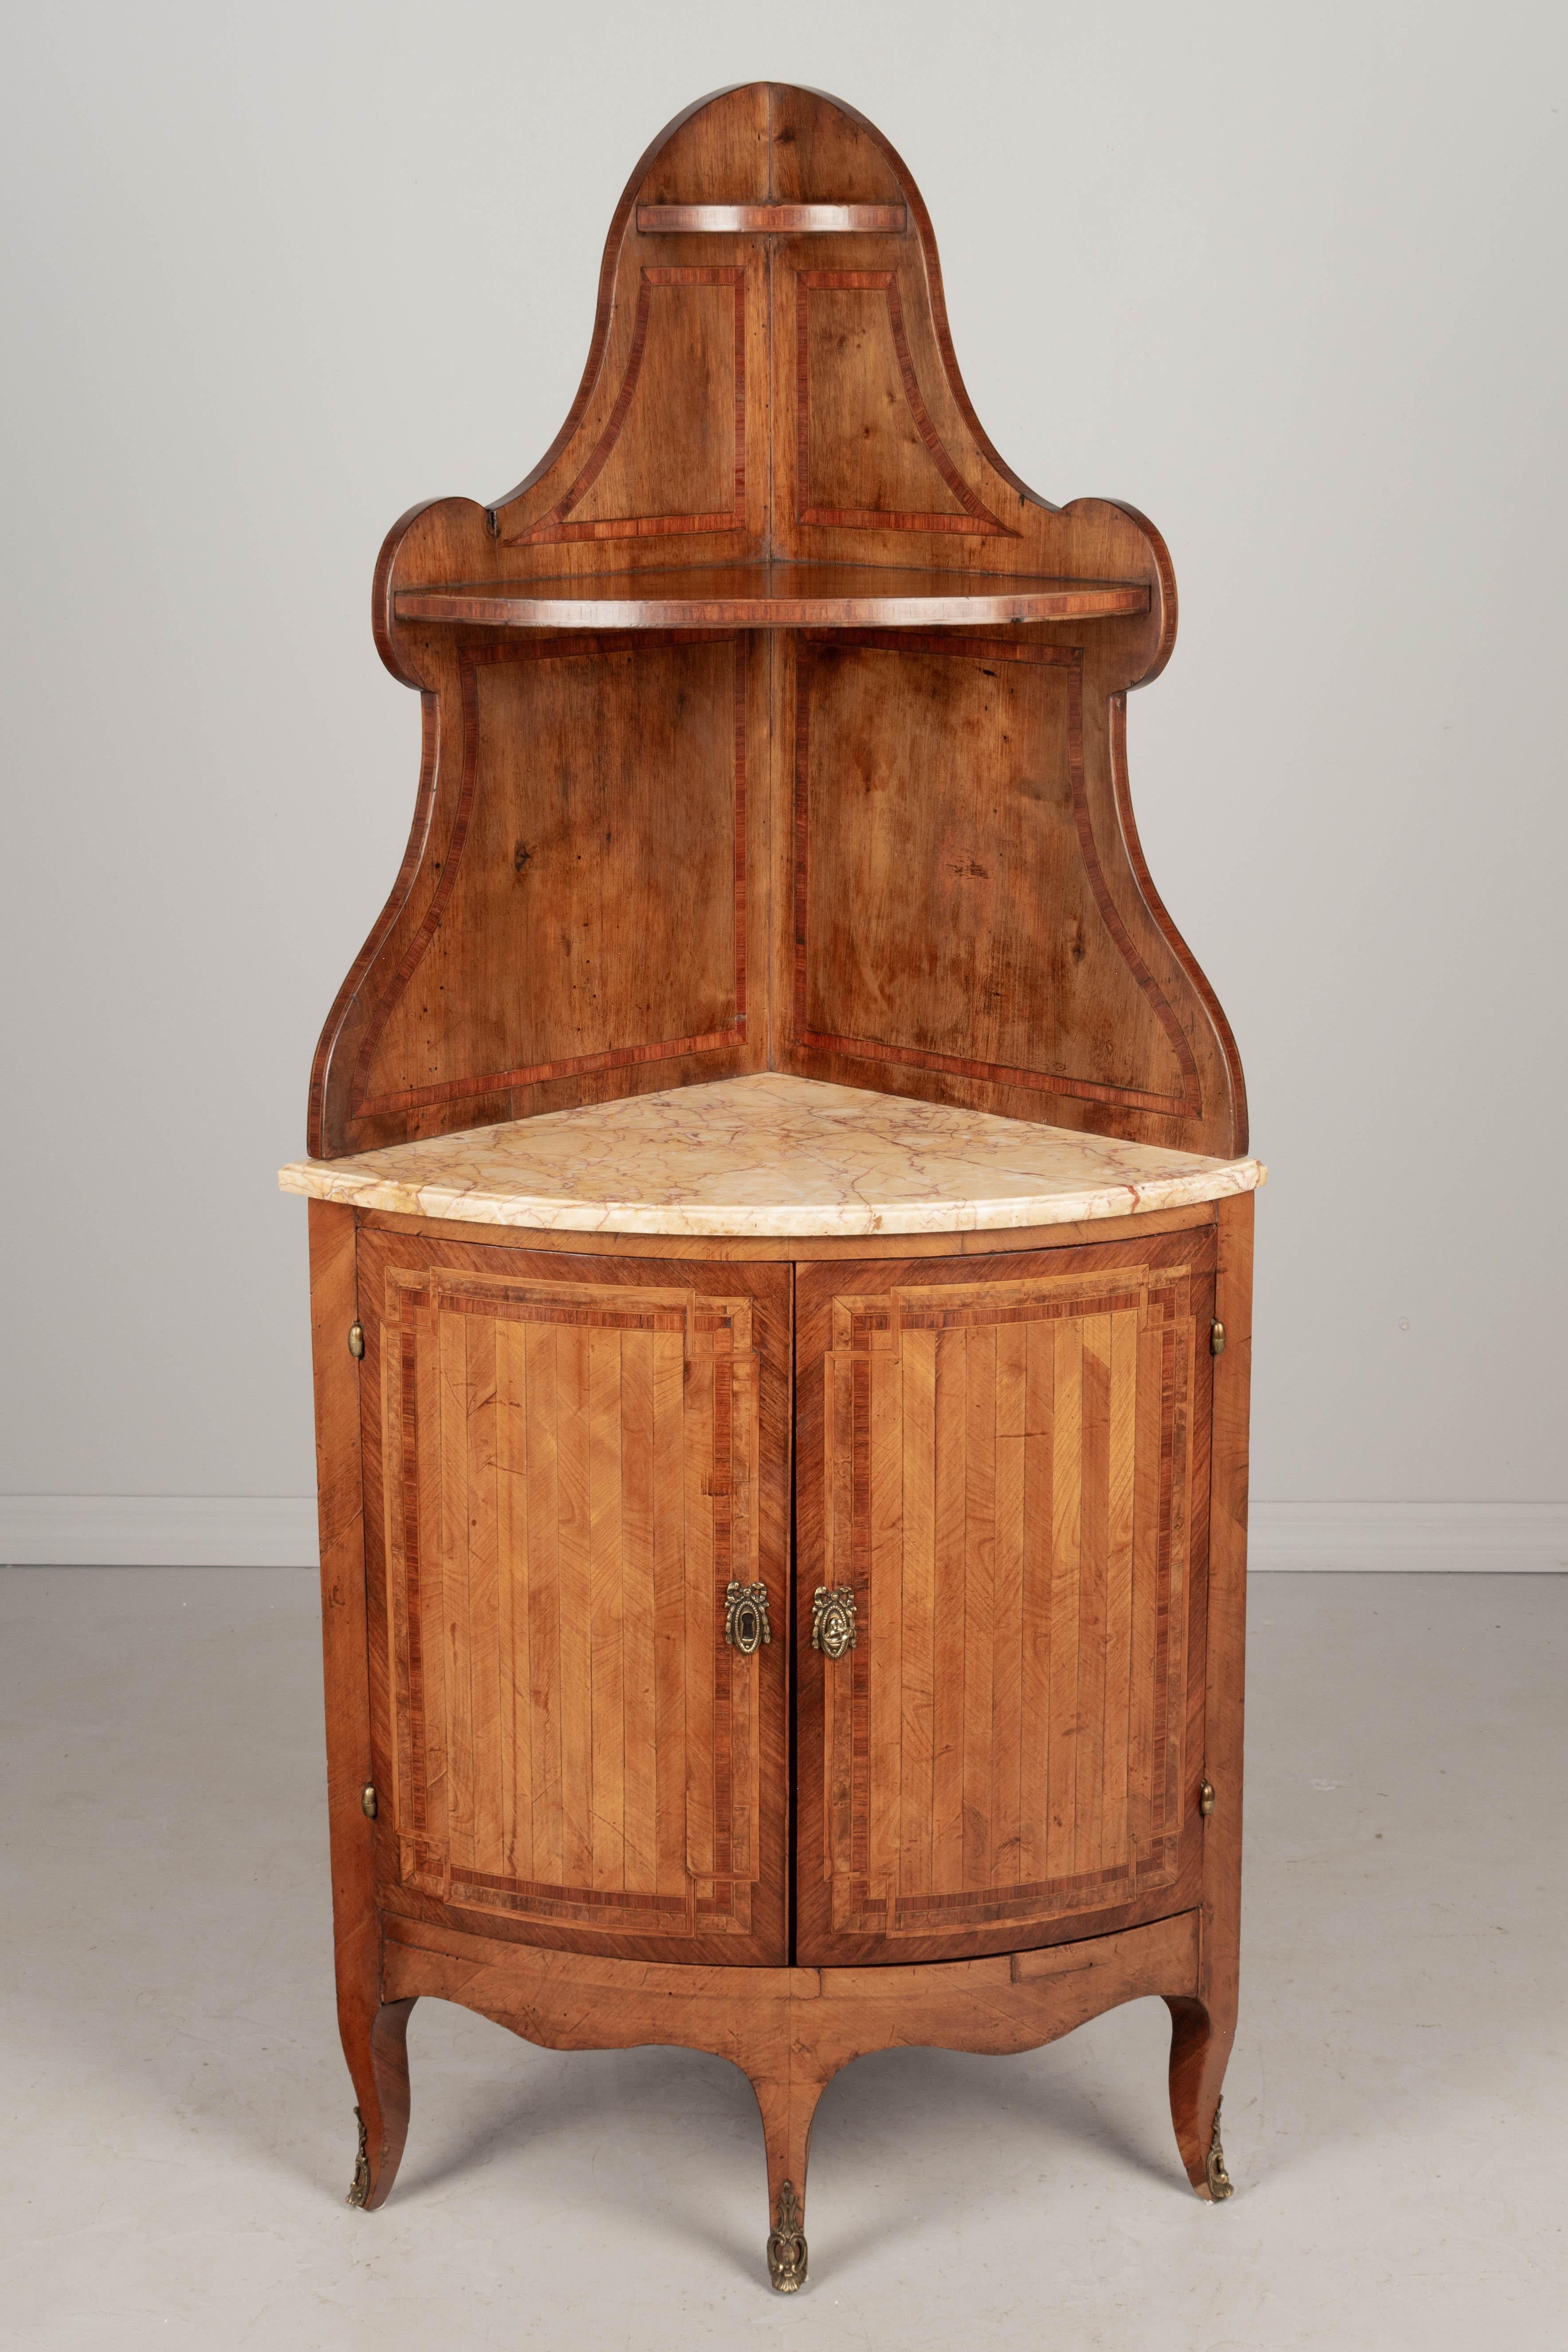 A 19th century French Louis XVI style marquetry corner cabinet with inlaid veneers of mahogany, walnut and cherry. In two parts, the marble top demilune cabinet opens to one interior shelf and has a working lock and one key. The tiered shelf rests